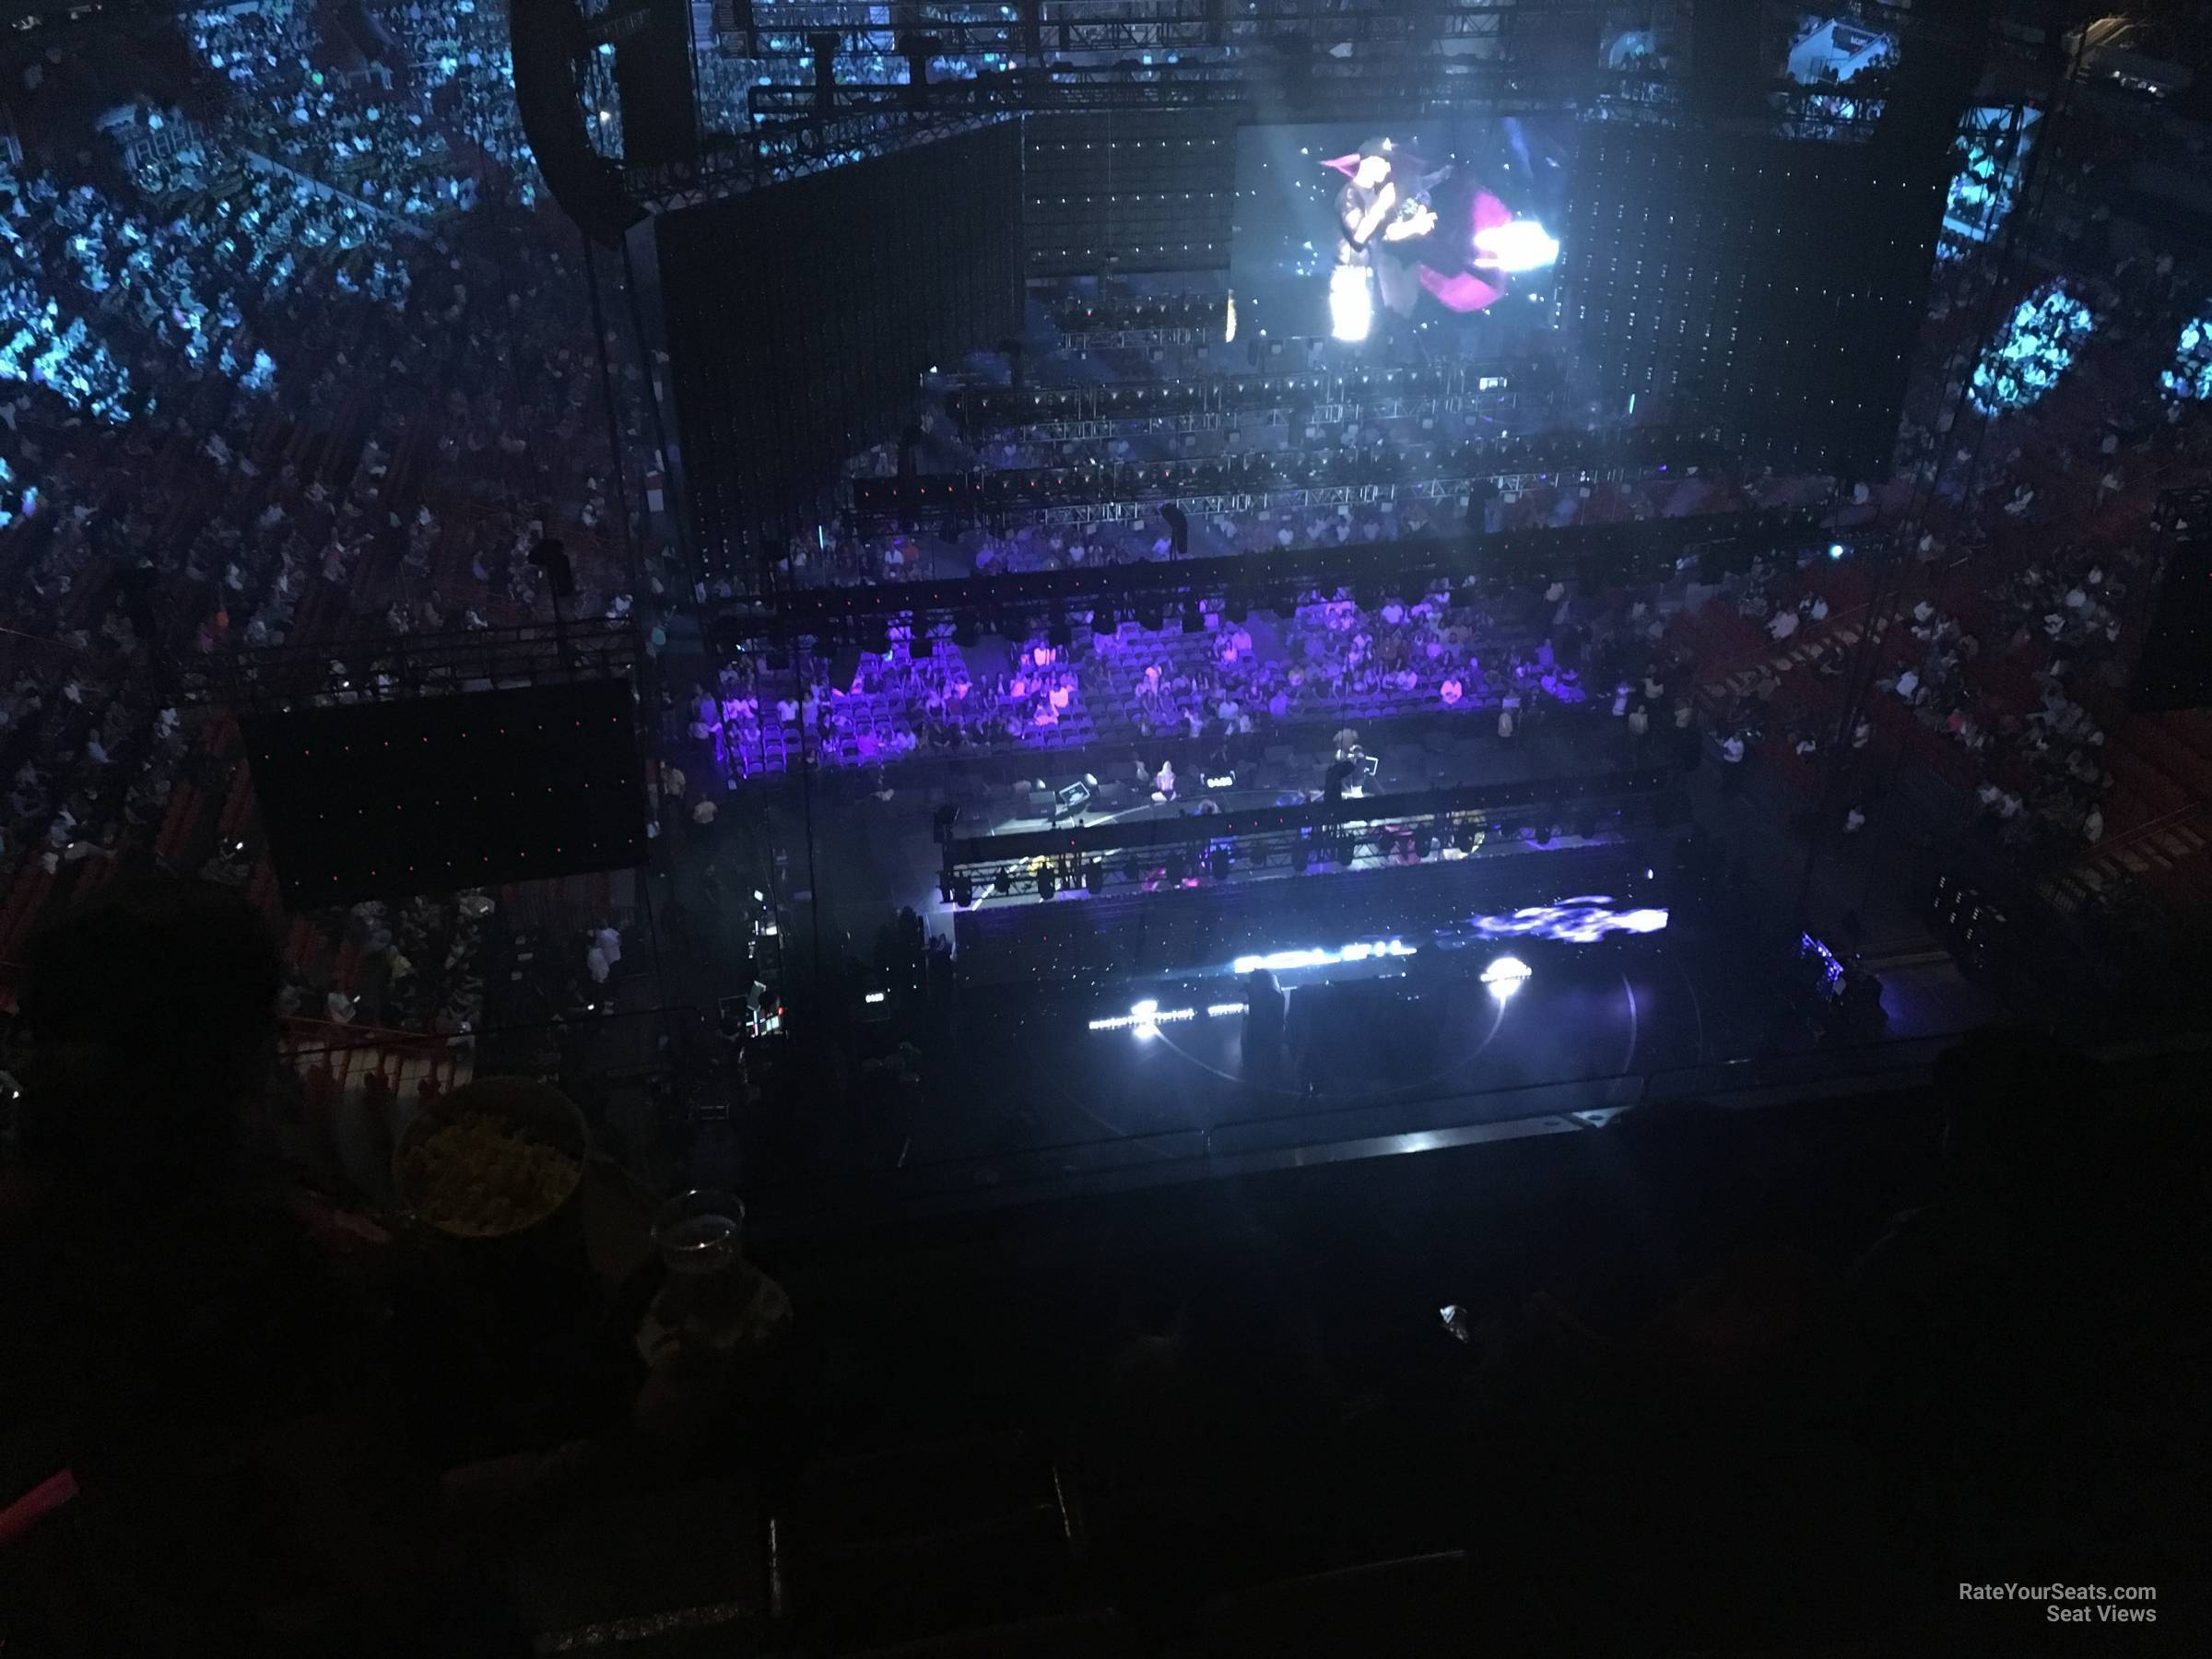 section 406, row 4 seat view  for concert - ftx arena